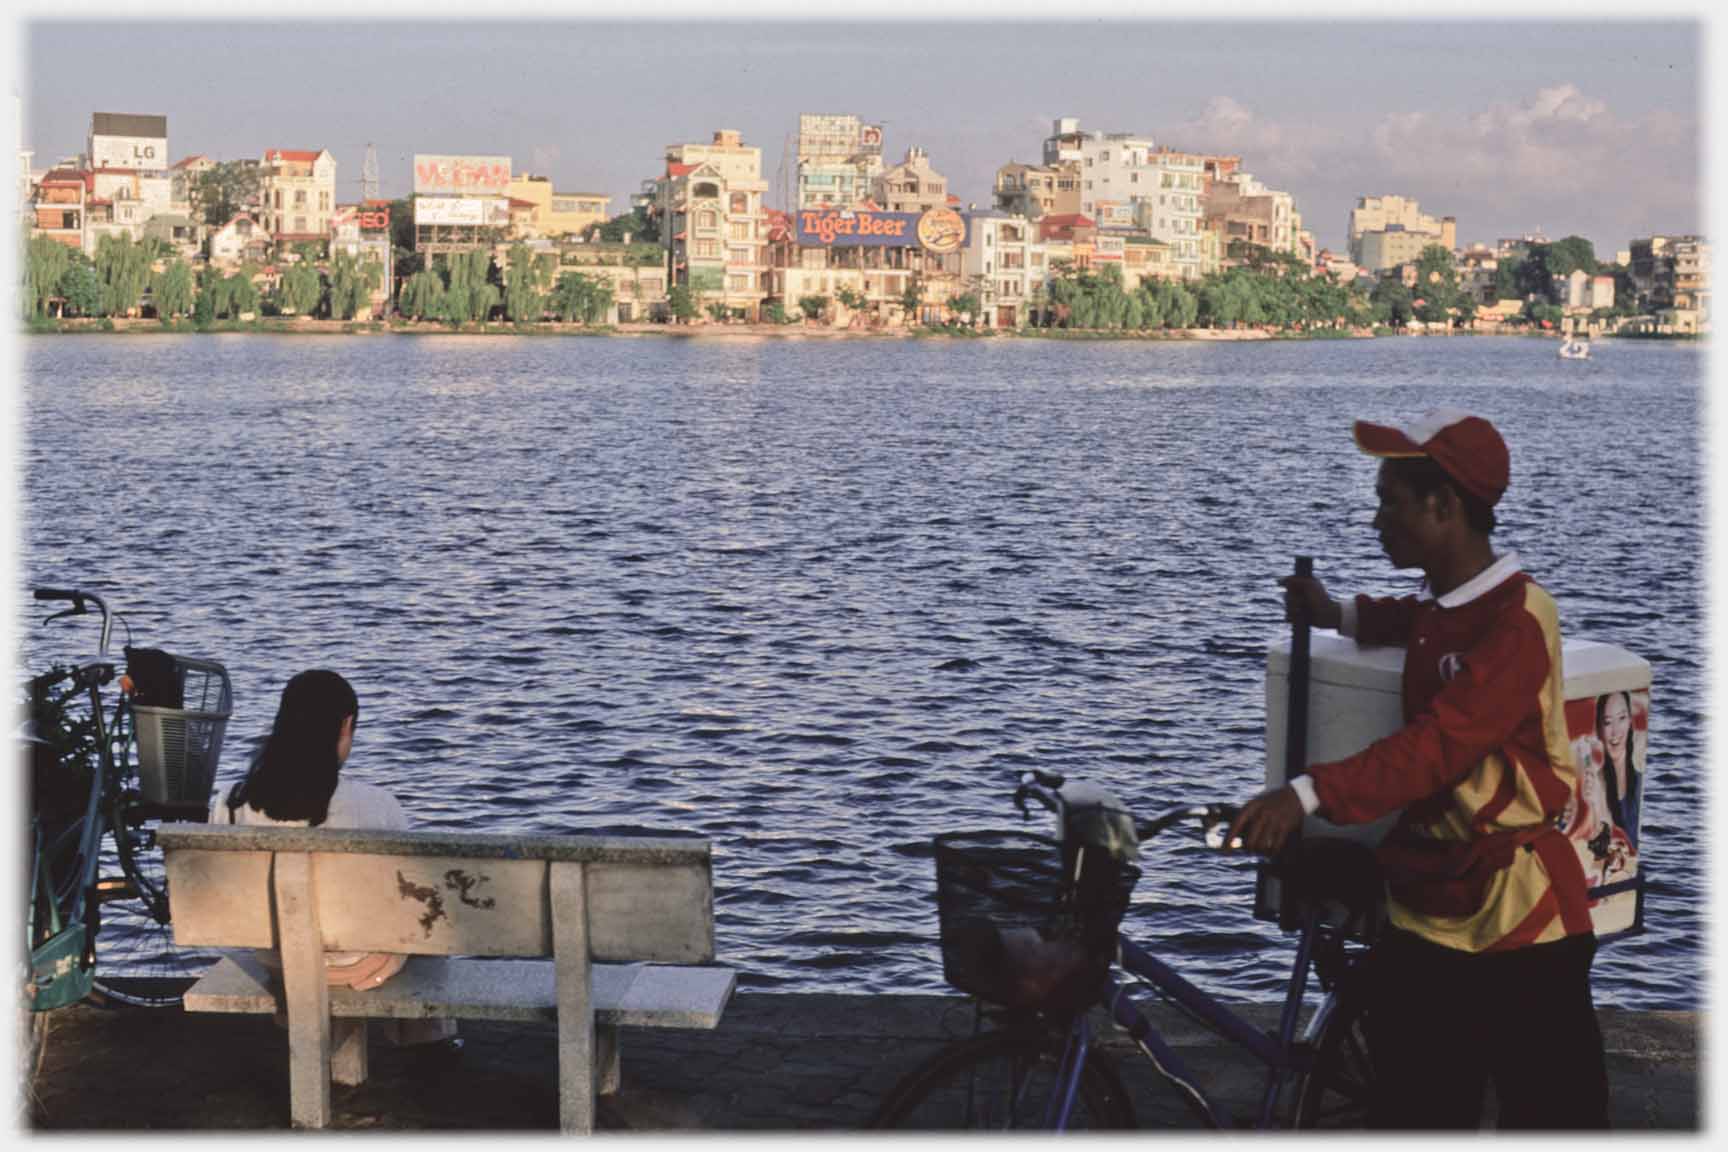 Man with converted cycles, girl on seat by lake.